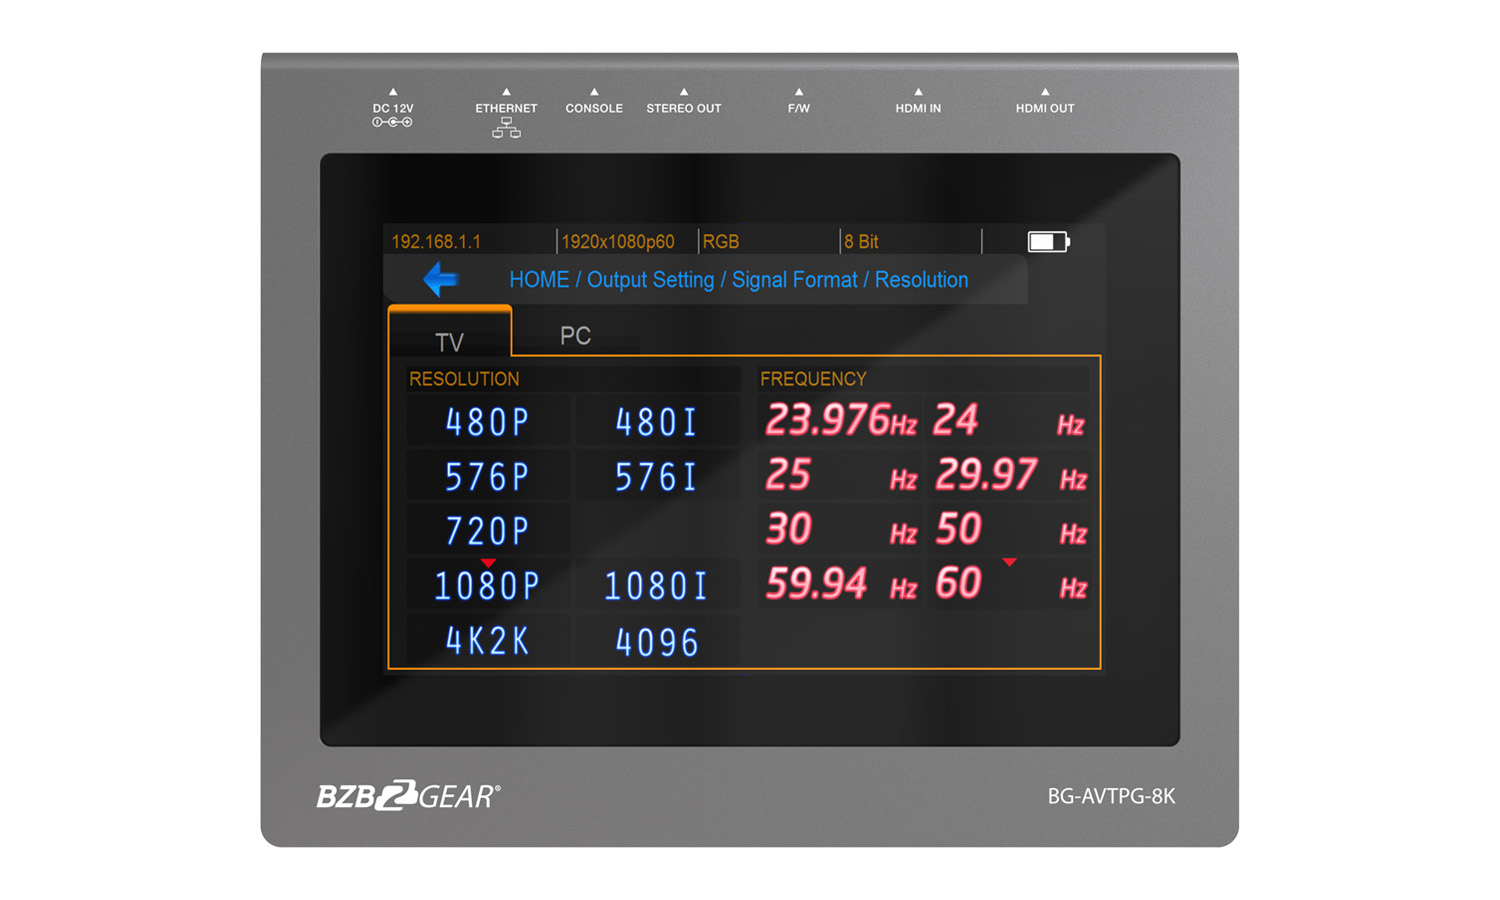 BG-AVTPG-8K 1080P FHD/4K/8K UHD HDMI 2.1 48Gbps Video Test Pattern Generator/Tester and Analyzer with Ethernet by BZBGEAR